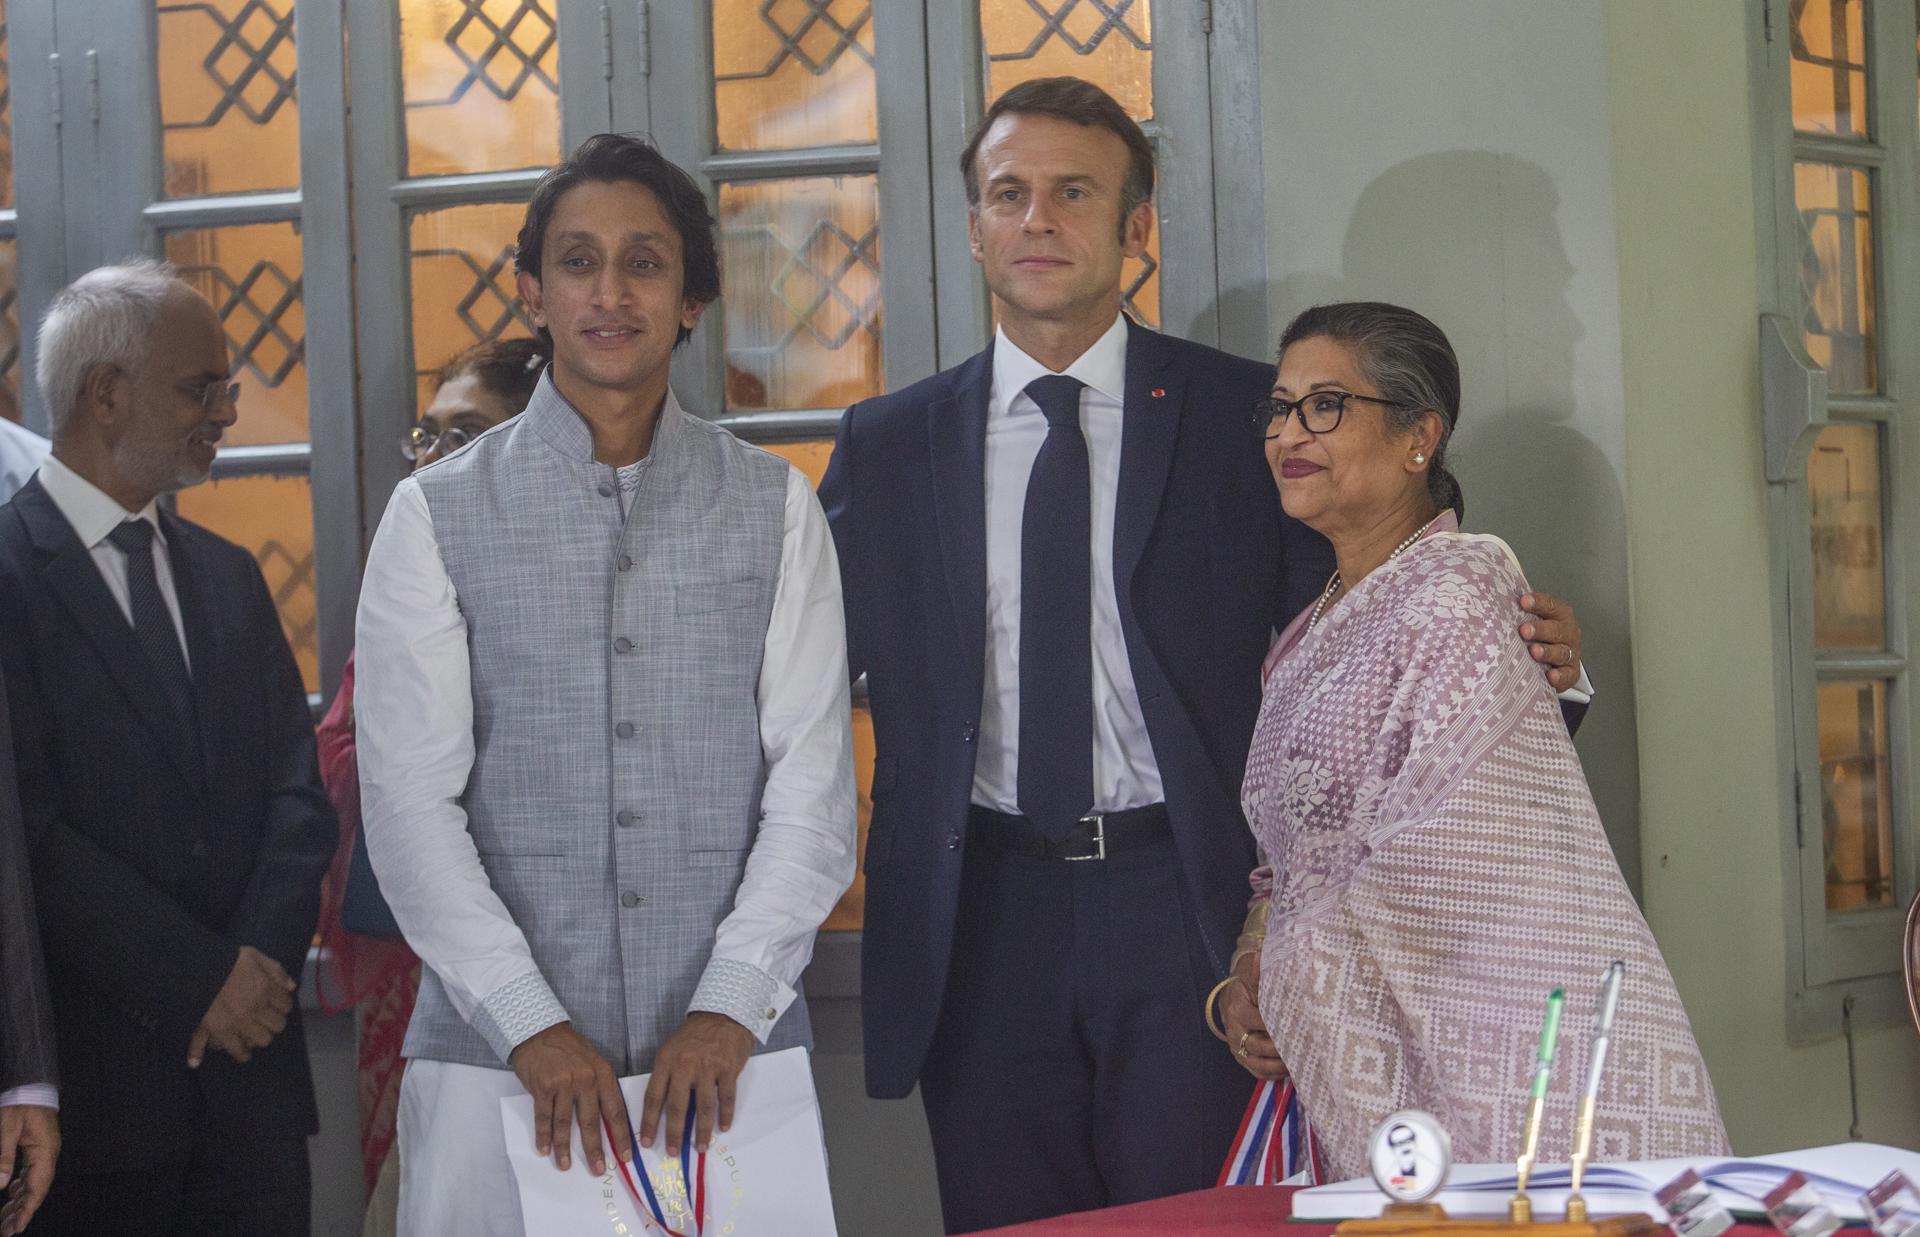 France President Emmanuel Macron poses for pictures with Sheikh Mujibur Rahman family members as he visits the Father of the Nation Bangabandhu Sheikh Mujibur Rahman Memorial Museum at Dhanmondi in Dhaka, Bangladesh, 11 September 2023. EFE/EPA/MONIRUL ALAM
